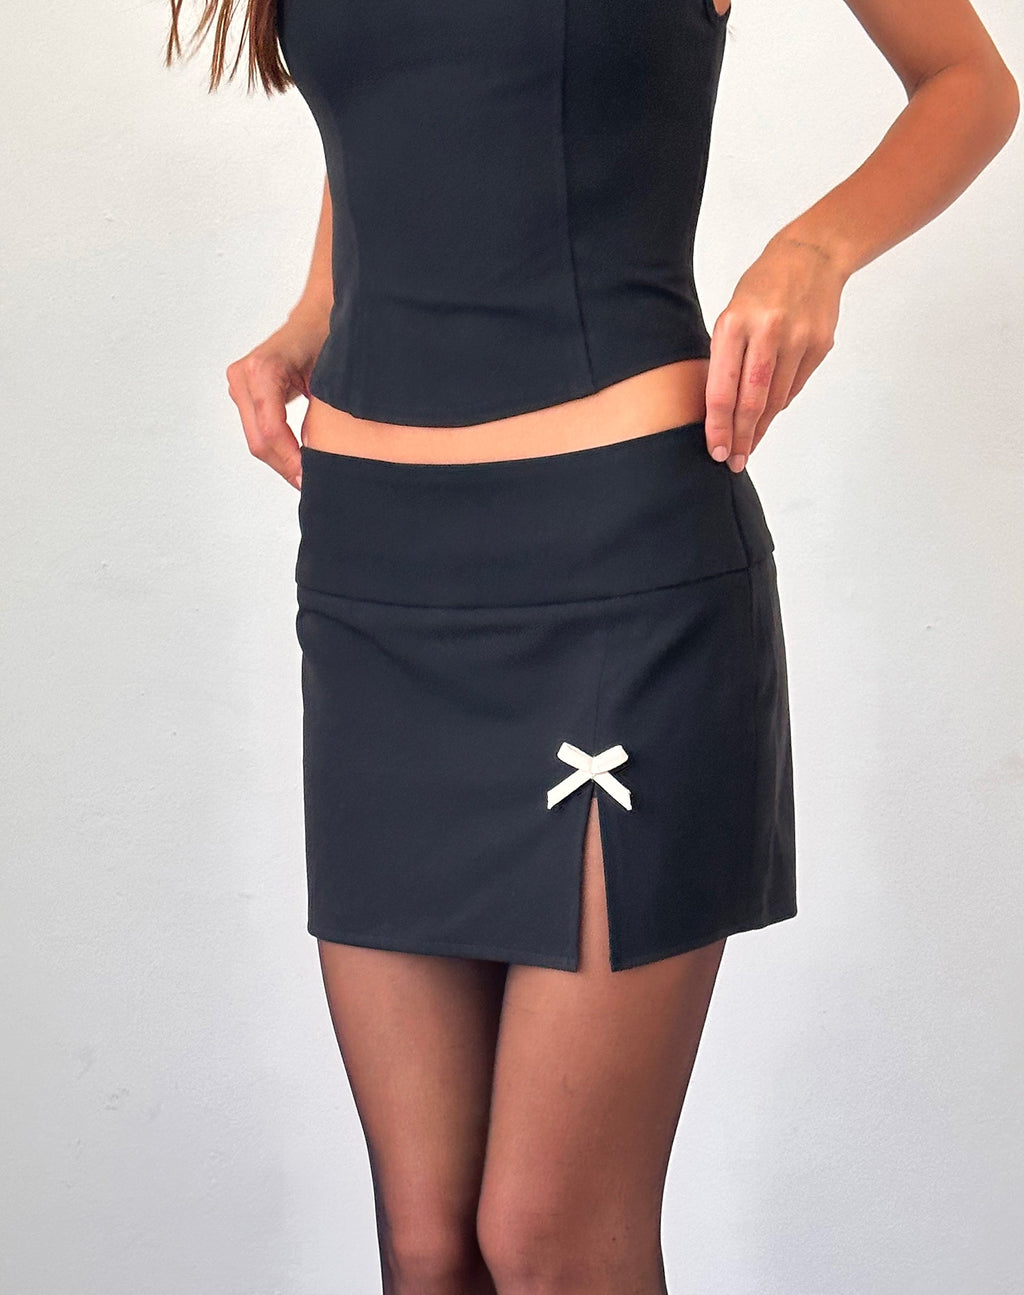 Yanti Mini Skirt in Black with Ivory Bows